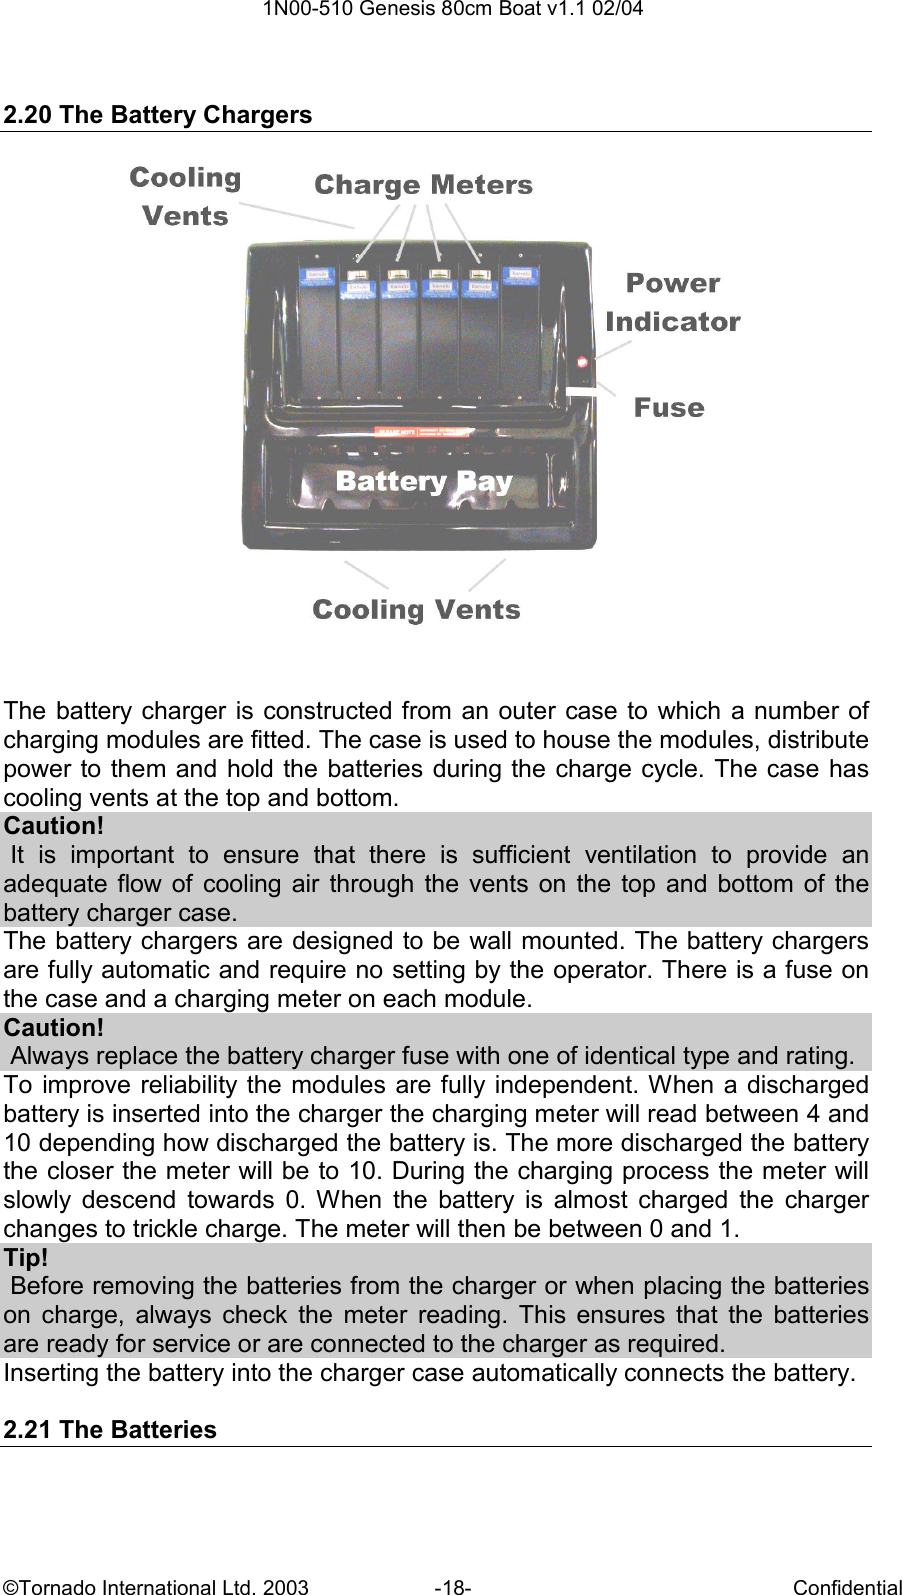  1N00-510 Genesis 80cm Boat v1.1 02/04 ©Tornado International Ltd. 2003  -18-  Confidential  2.20 The Battery Chargers   The battery charger is  constructed from an outer case to which a number of charging modules are fitted. The case is used to house the modules, distribute power to them and hold the batteries during the charge cycle. The case  has cooling vents at the top and bottom. Caution!  It  is  important  to  ensure  that  there  is  sufficient  ventilation  to  provide  an adequate  flow of  cooling air  through the vents  on  the  top  and  bottom of  the battery charger case. The battery chargers are designed to be wall mounted. The battery chargers are fully automatic and require no setting by the operator. There is a fuse on the case and a charging meter on each module. Caution!  Always replace the battery charger fuse with one of identical type and rating. To improve reliability the modules are fully independent. When a discharged battery is inserted into the charger the charging meter will read between 4 and 10 depending how discharged the battery is. The more discharged the battery the closer the meter will be to 10. During the charging process the meter will slowly  descend  towards  0.  When  the  battery  is  almost  charged  the  charger changes to trickle charge. The meter will then be between 0 and 1.  Tip!  Before removing the batteries from the charger or when placing the batteries on  charge,  always  check  the  meter  reading.  This  ensures  that  the  batteries are ready for service or are connected to the charger as required. Inserting the battery into the charger case automatically connects the battery.  2.21 The Batteries 